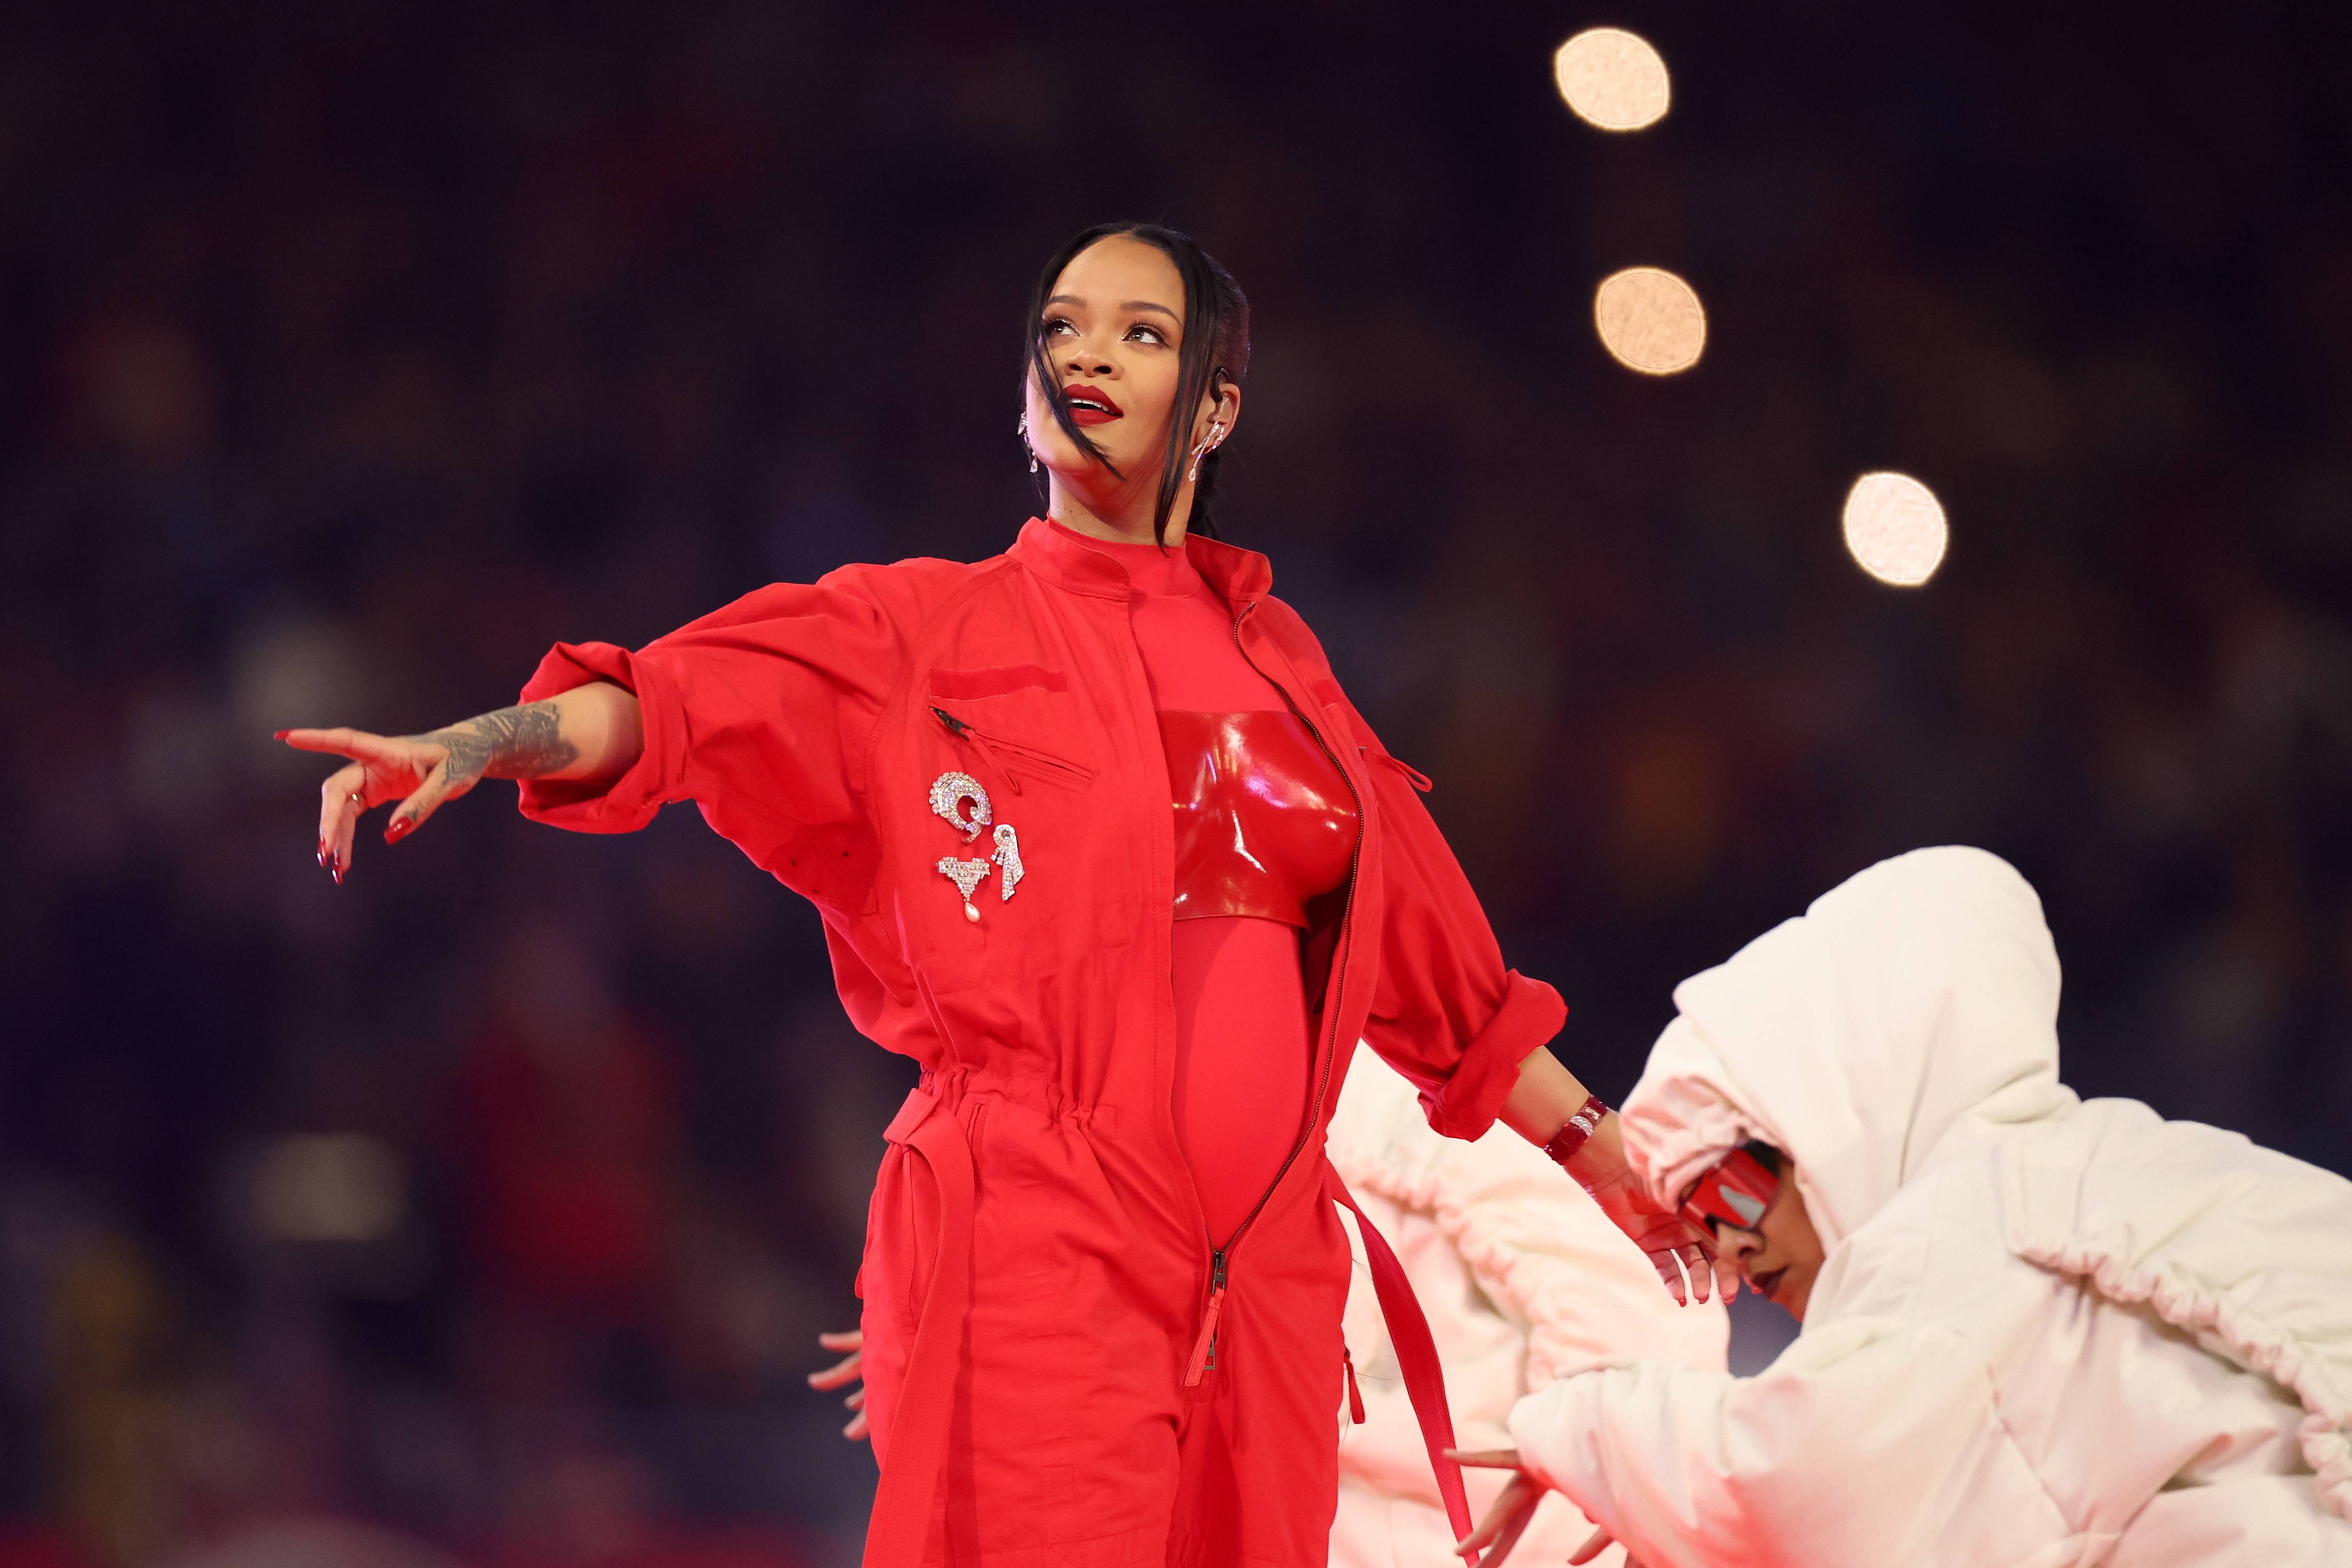 Rihanna performs onstage during the Apple Music Super Bowl LVII Halftime Show at State Farm Stadium on February 12, 2023 in Glendale, Arizona.